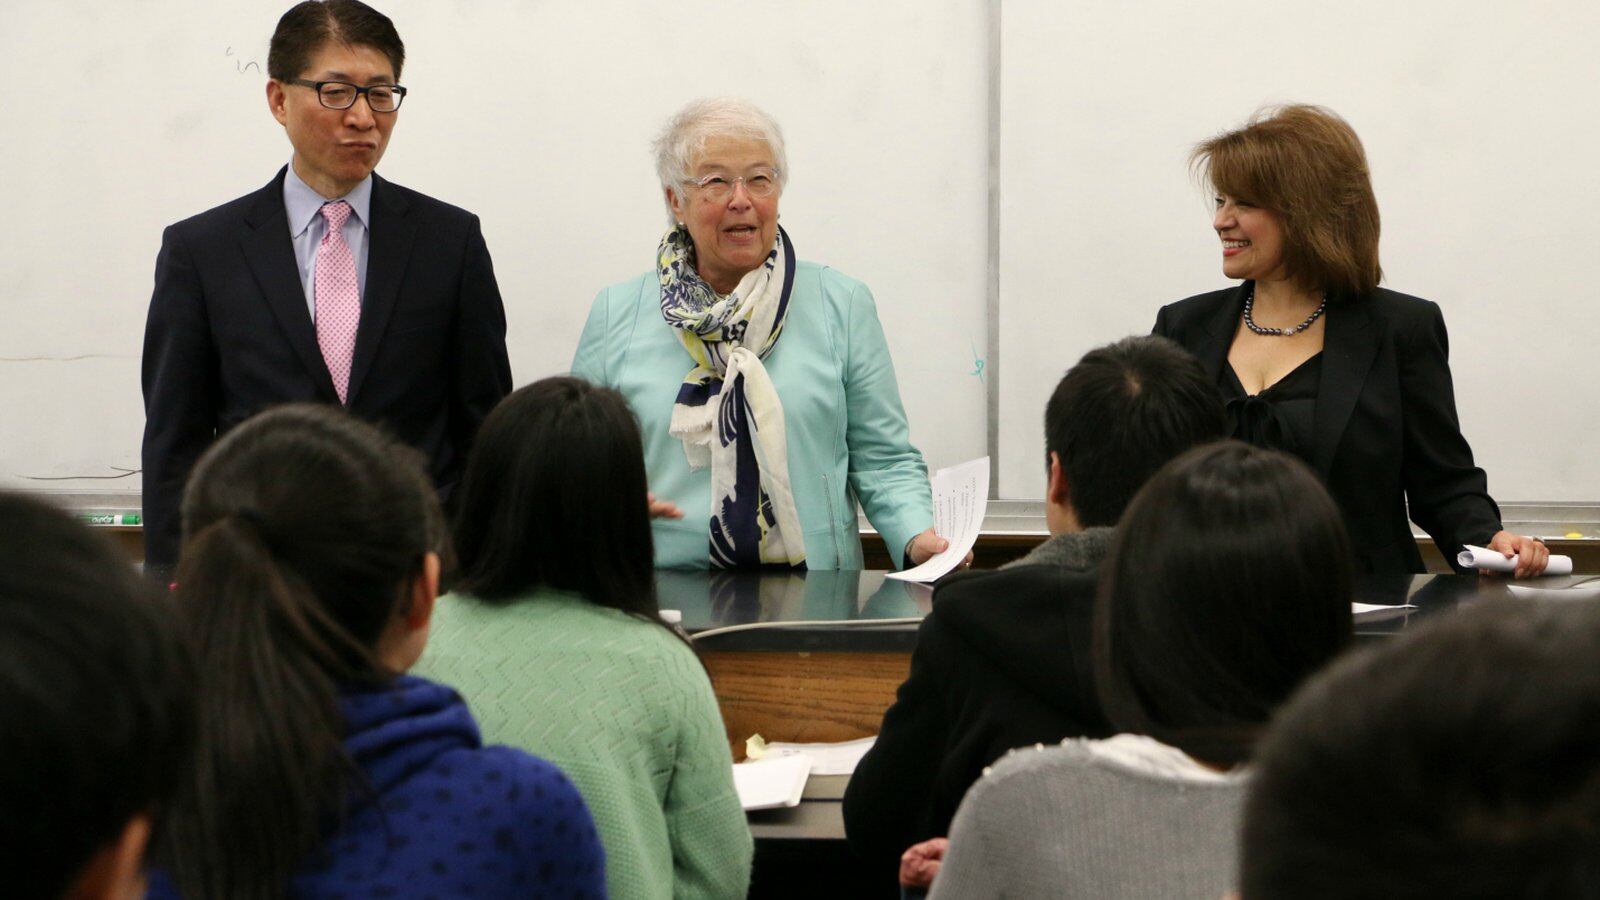 Chancellor Carmen Fariña with High School for Dual Language and Asian Studies Principal Li Yan and Deputy Chancellor for the Division of English Language Learners and Student Support Milady Baez.